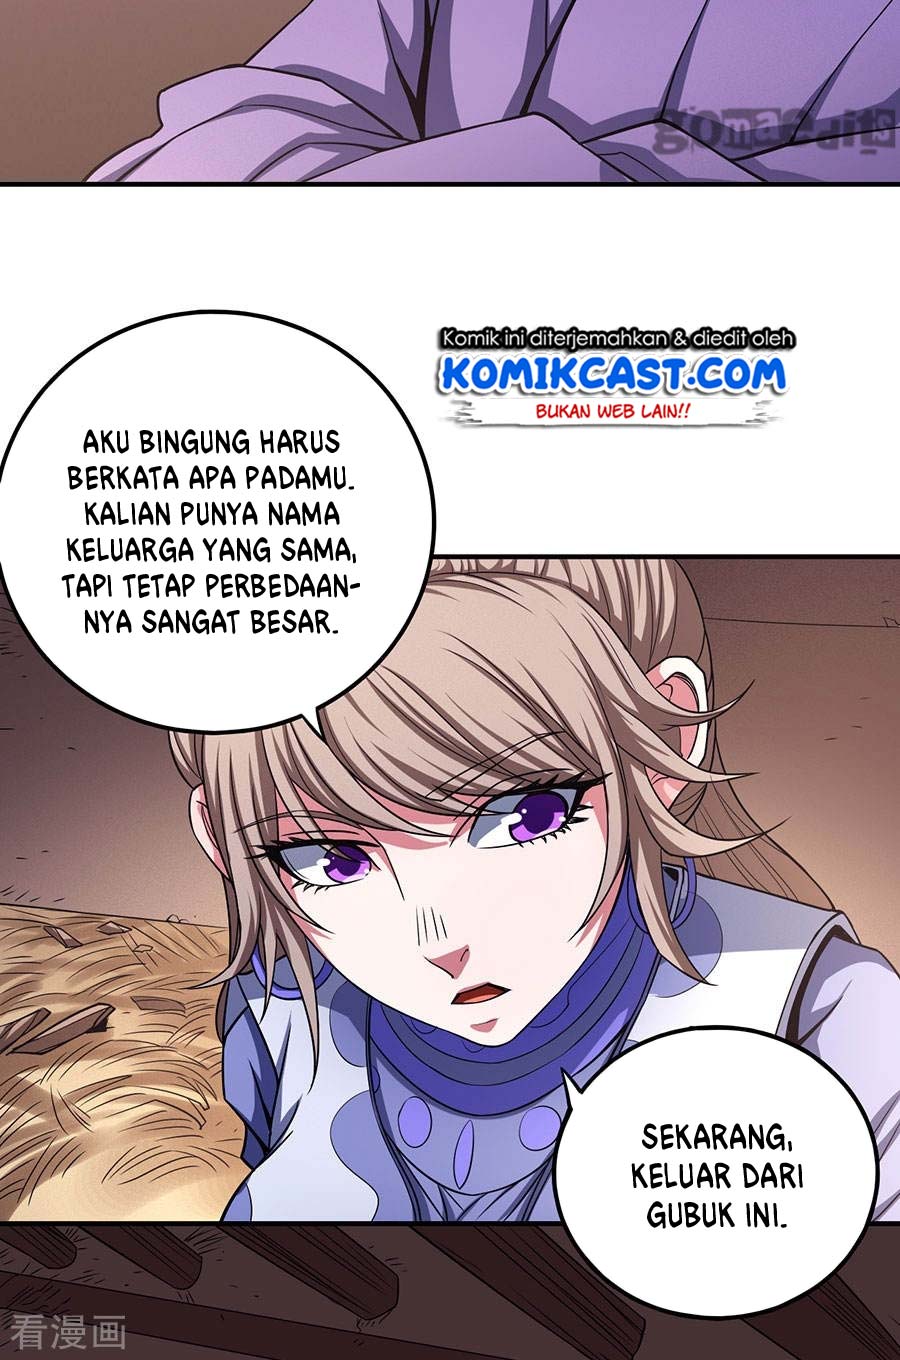 God of Martial Arts Chapter 304